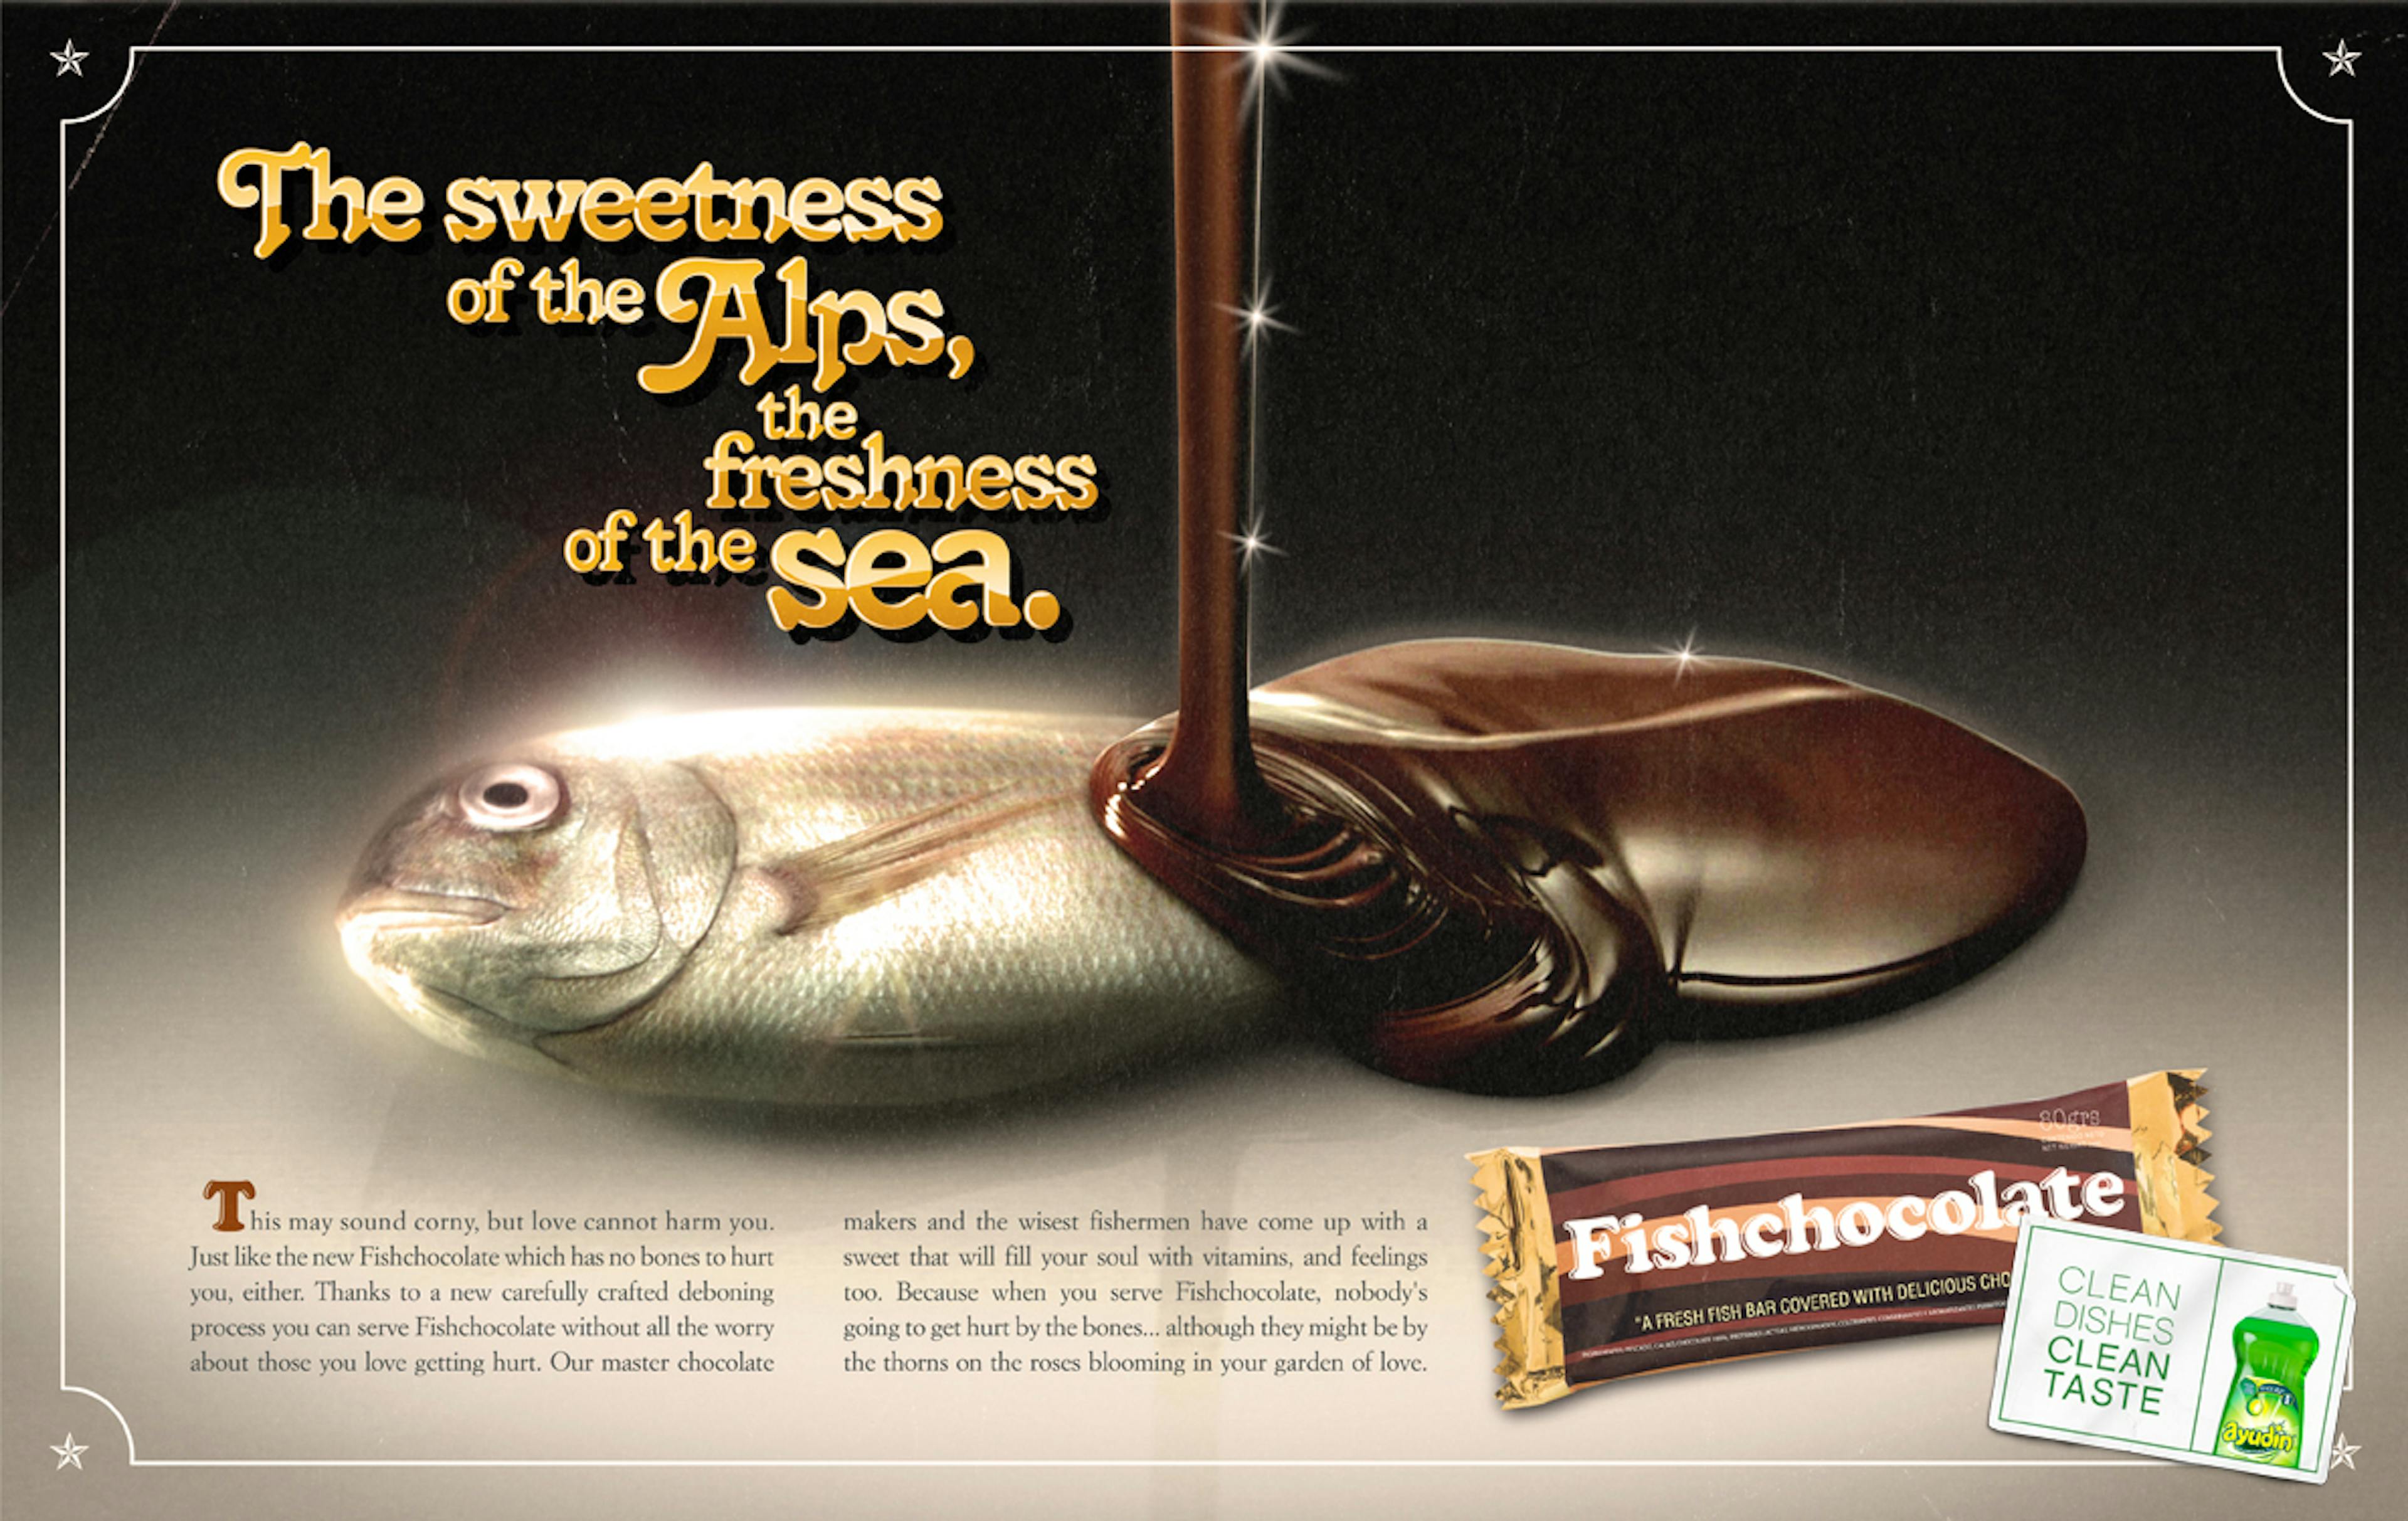 Ad for chocolate fish